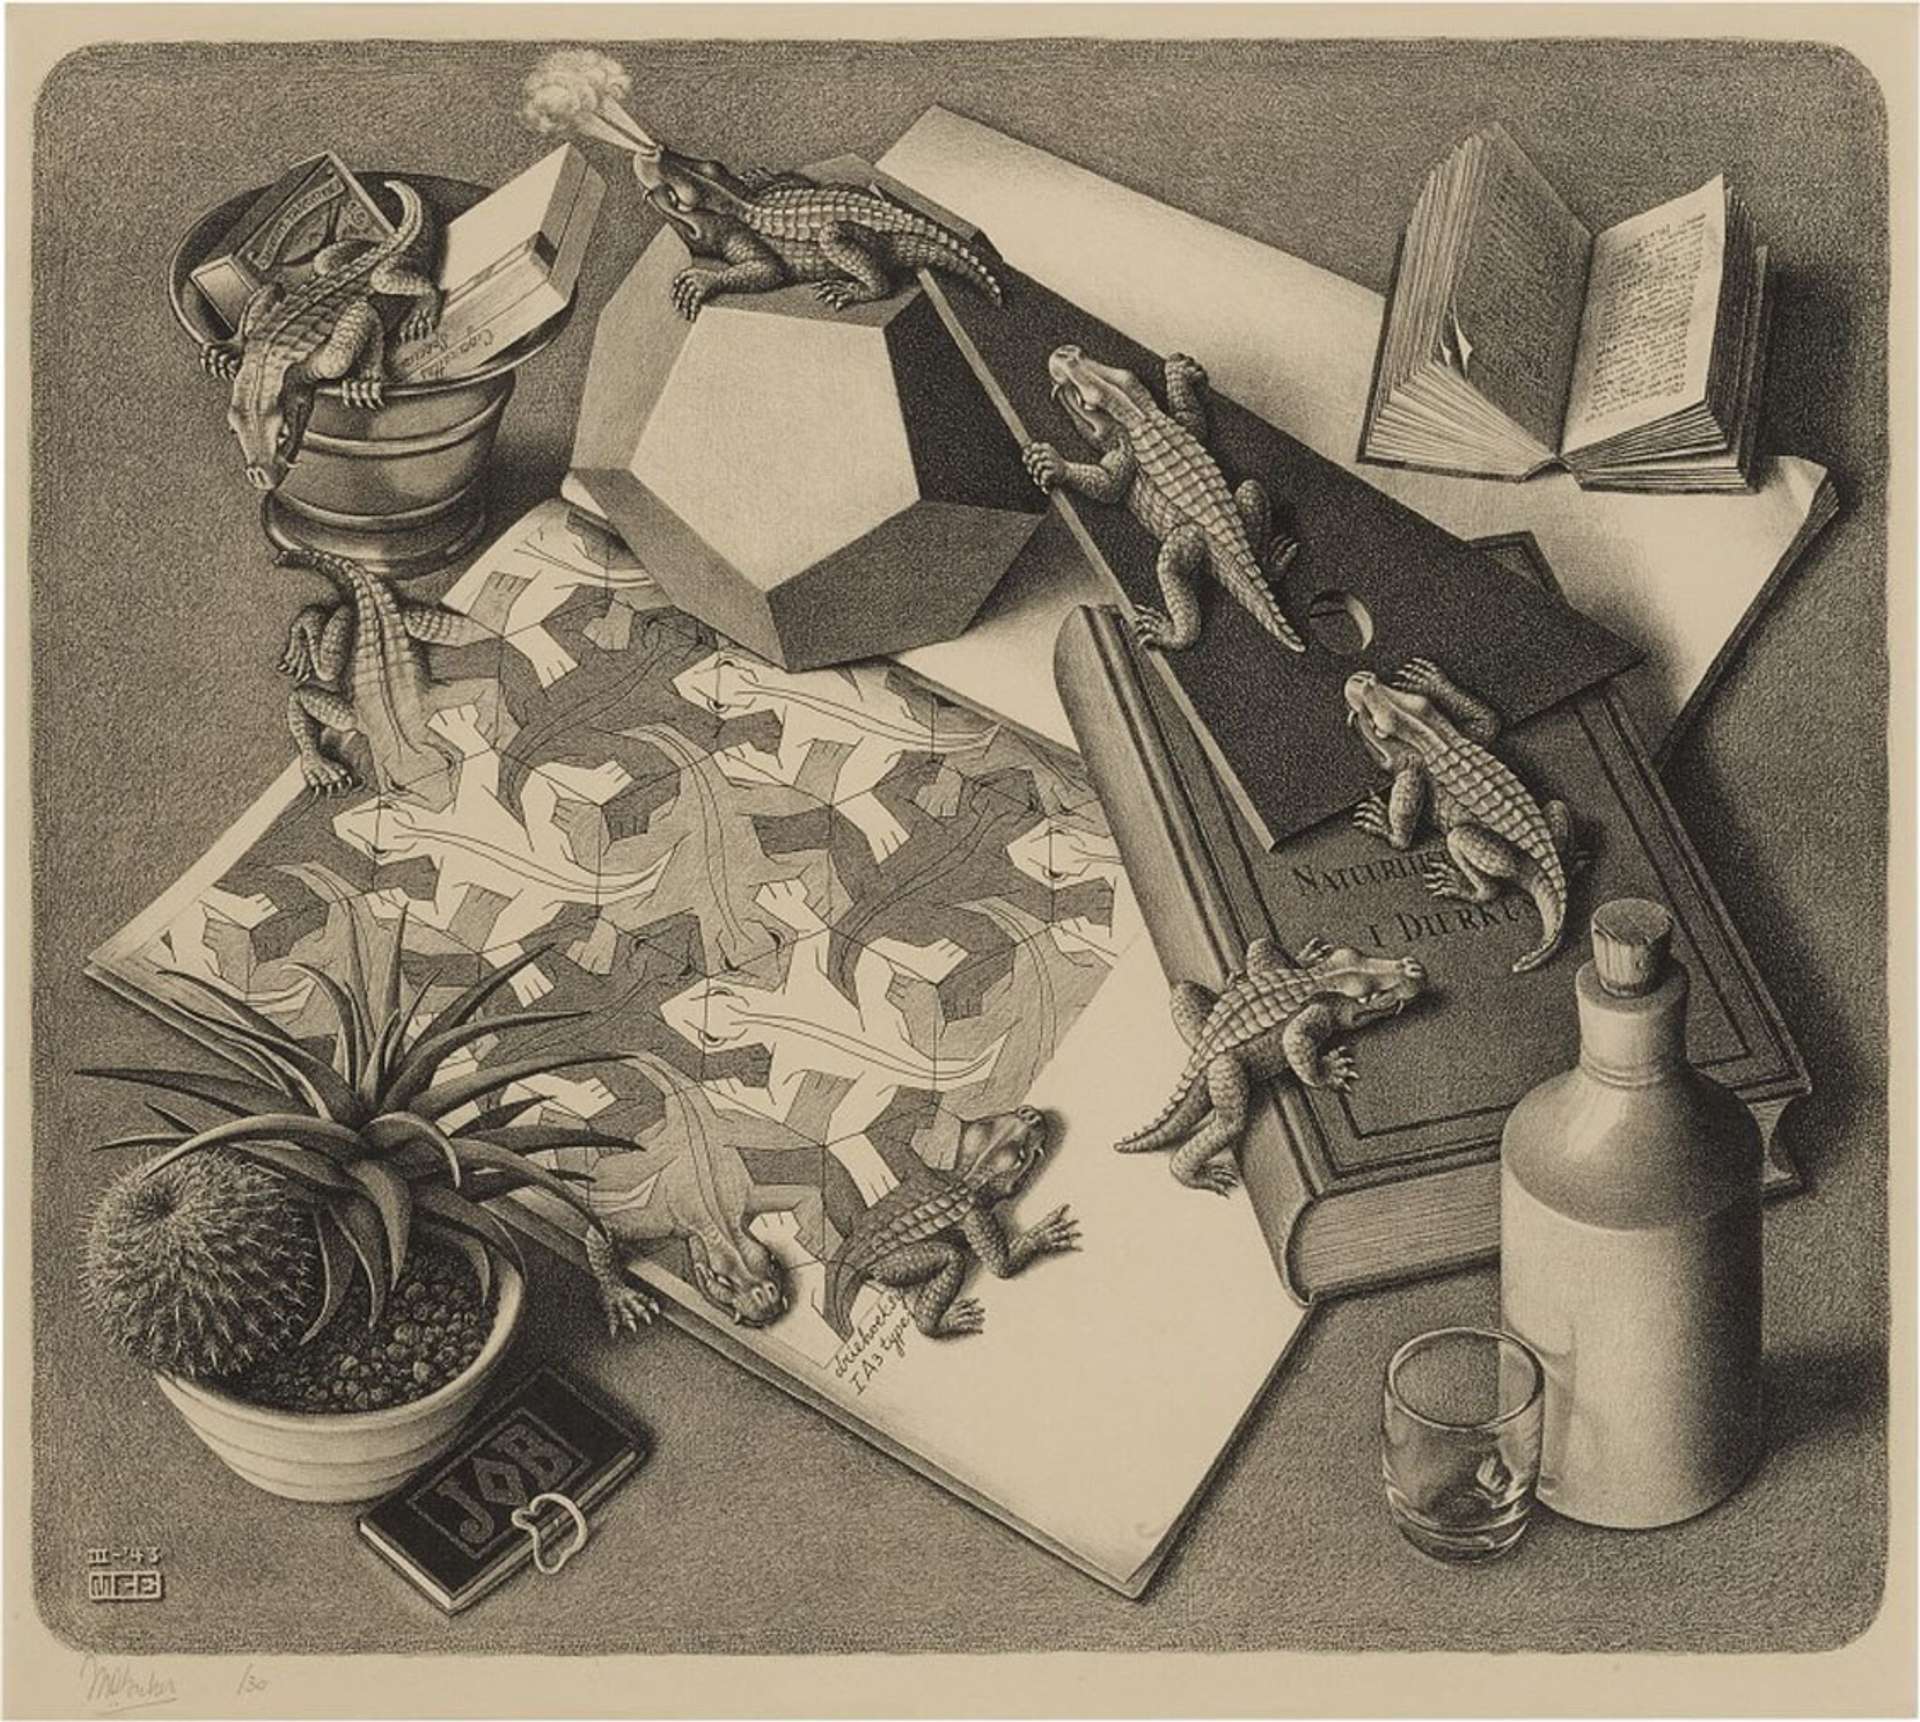 Lithograph of a still life with reptiles